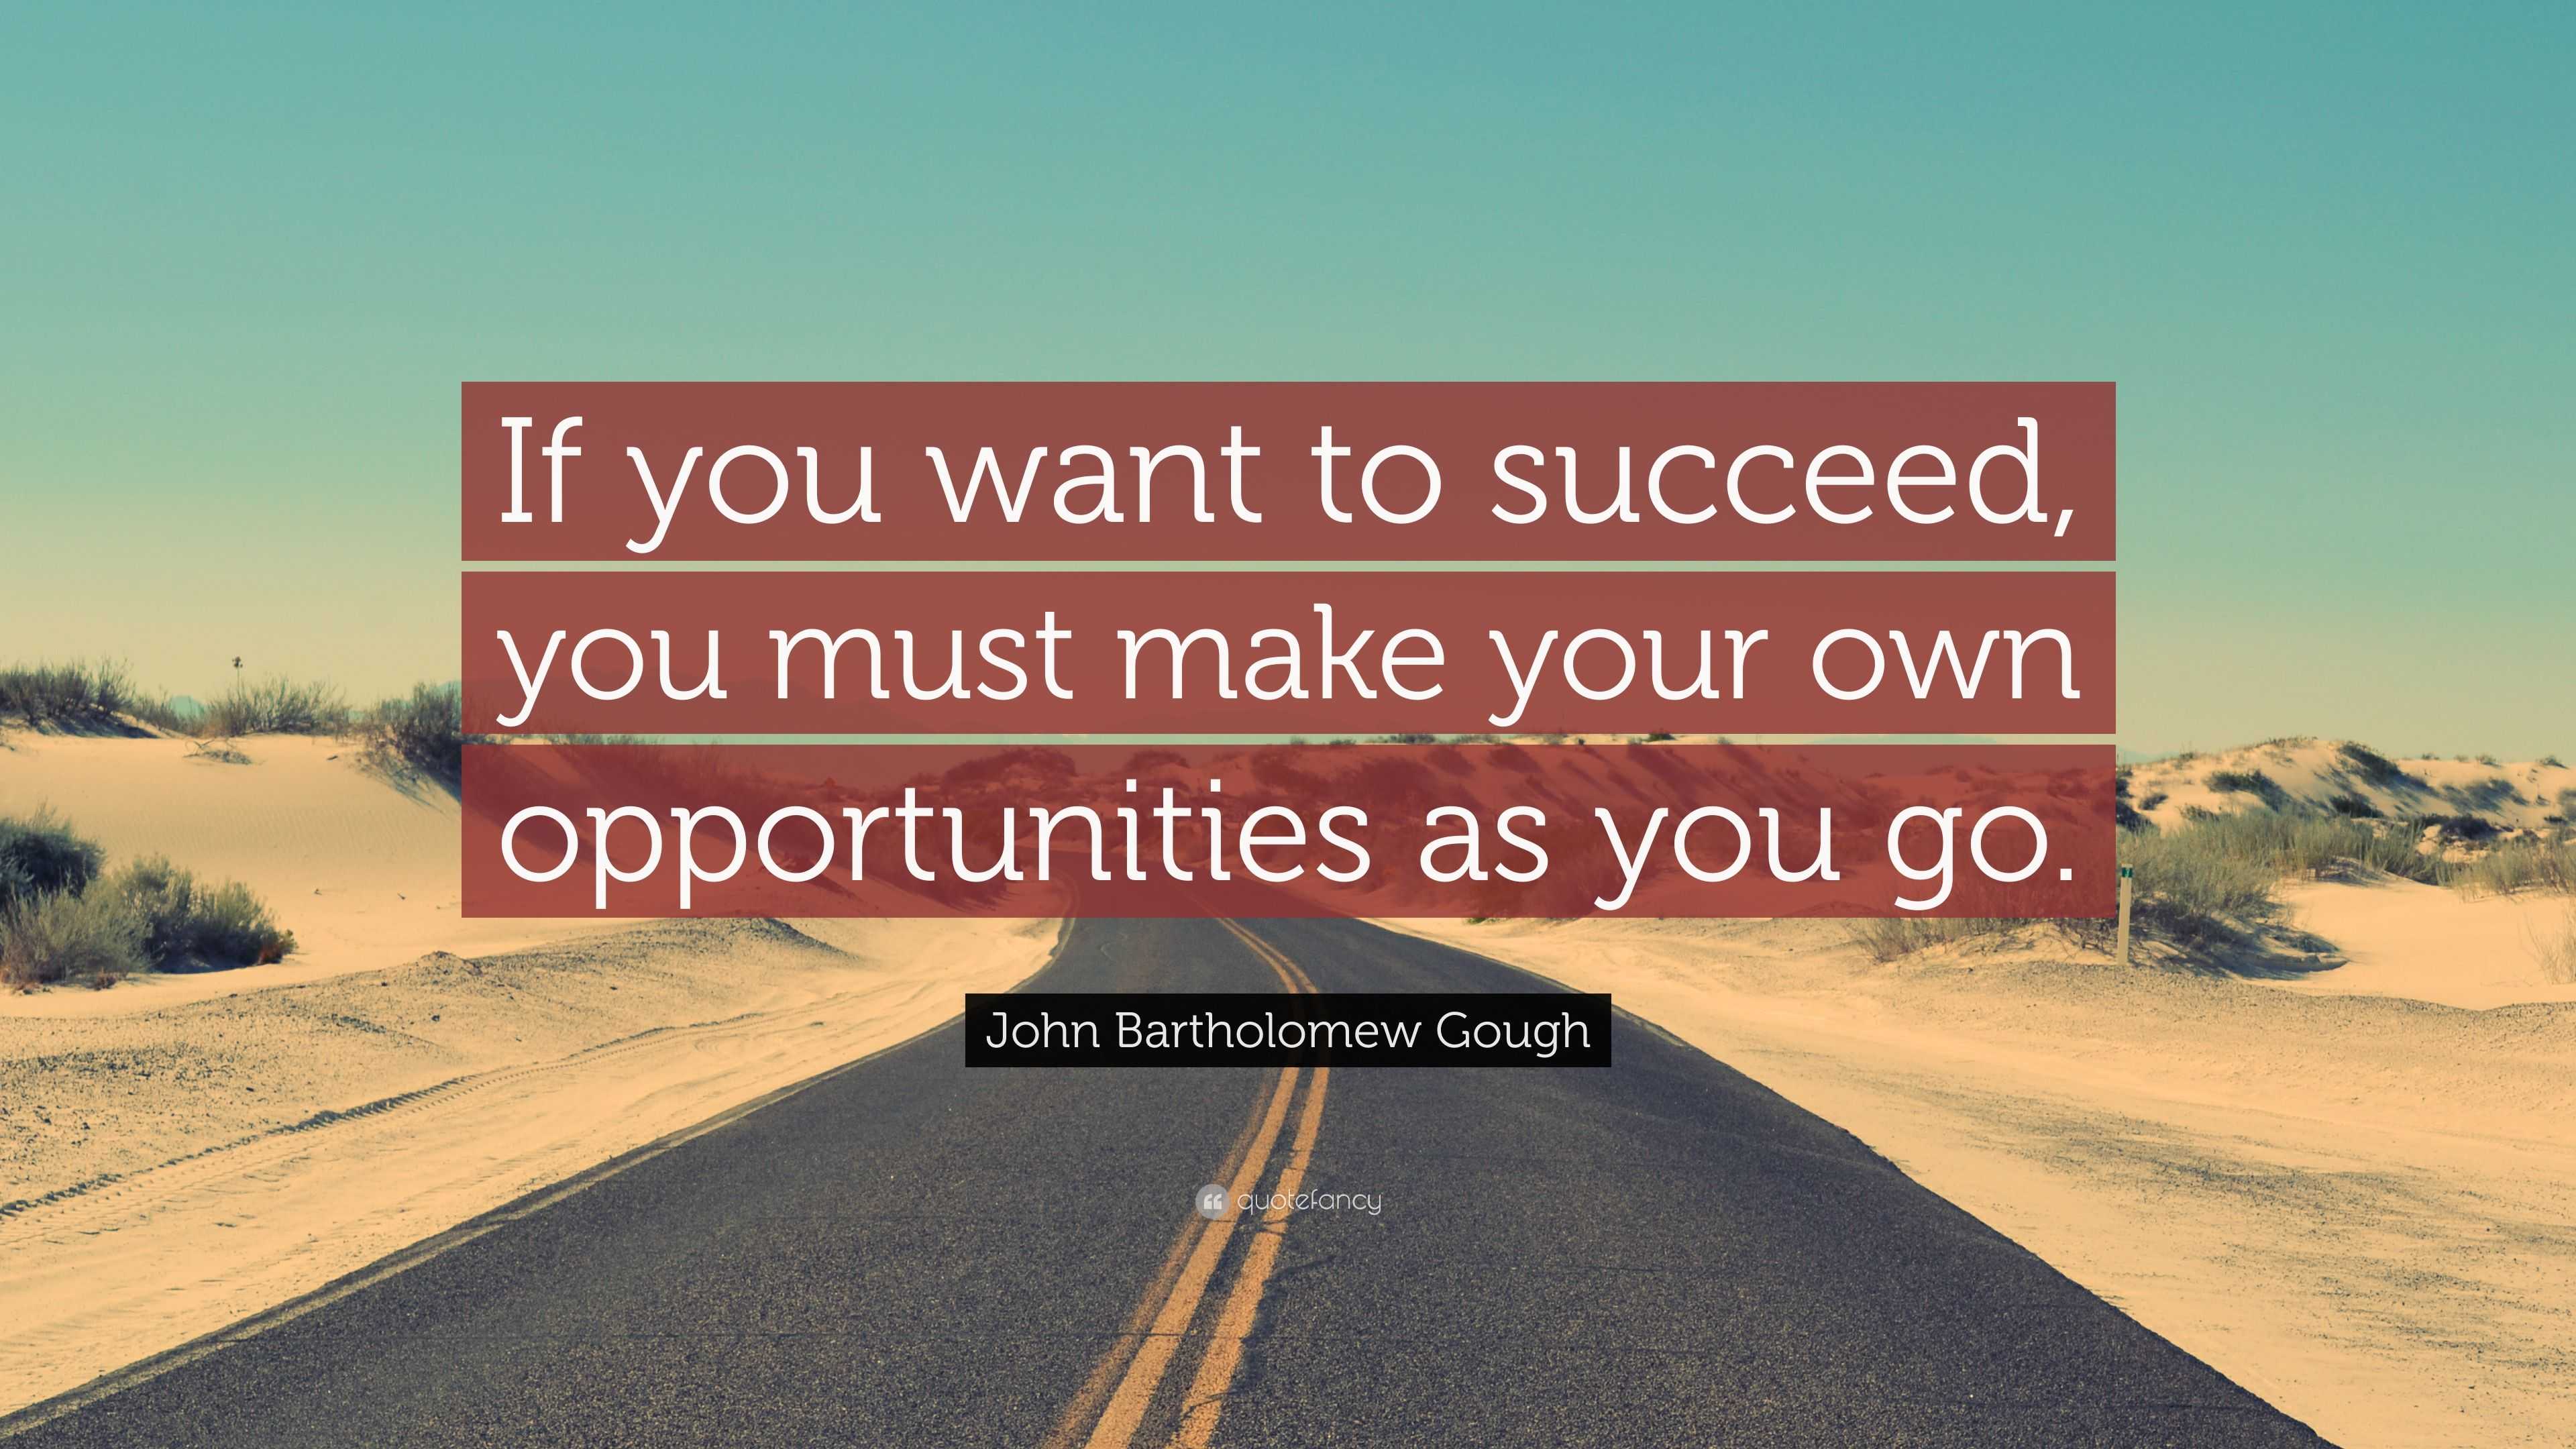 John Bartholomew Gough Quote: “If you want to succeed, you must make ...